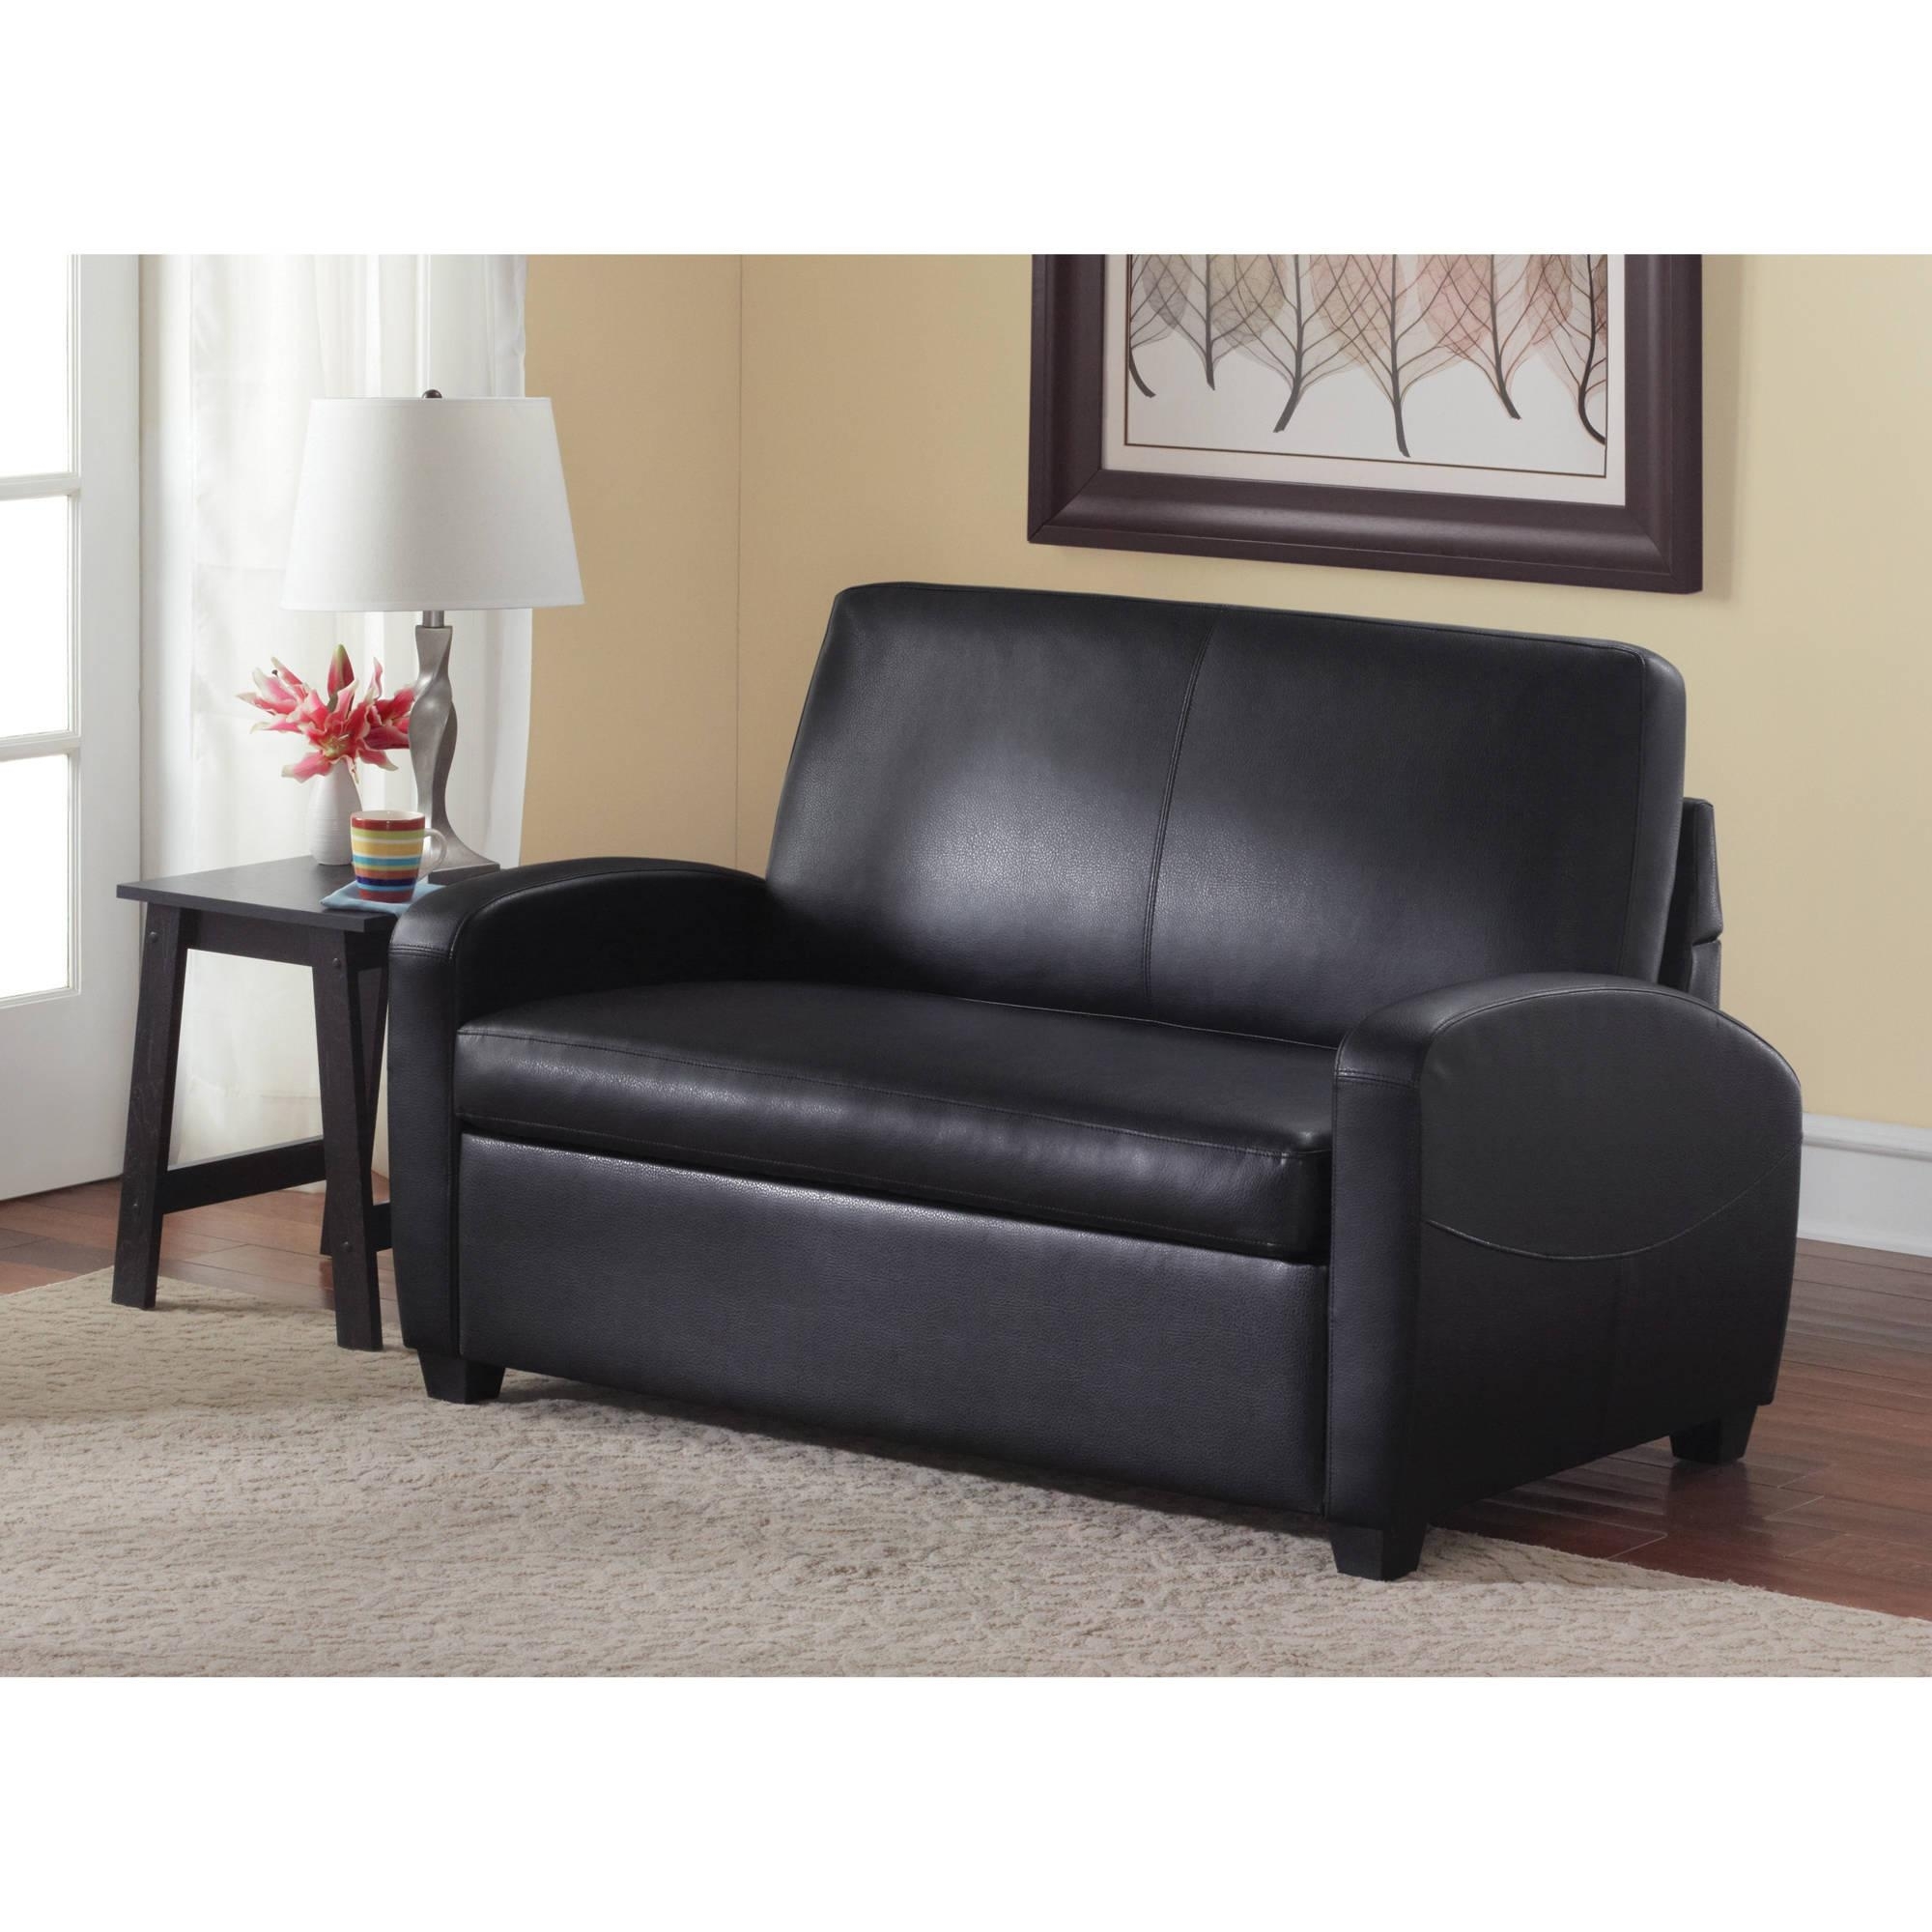 Leather Loveseat Sleepers Visualhunt, Leather Pull Out Bed